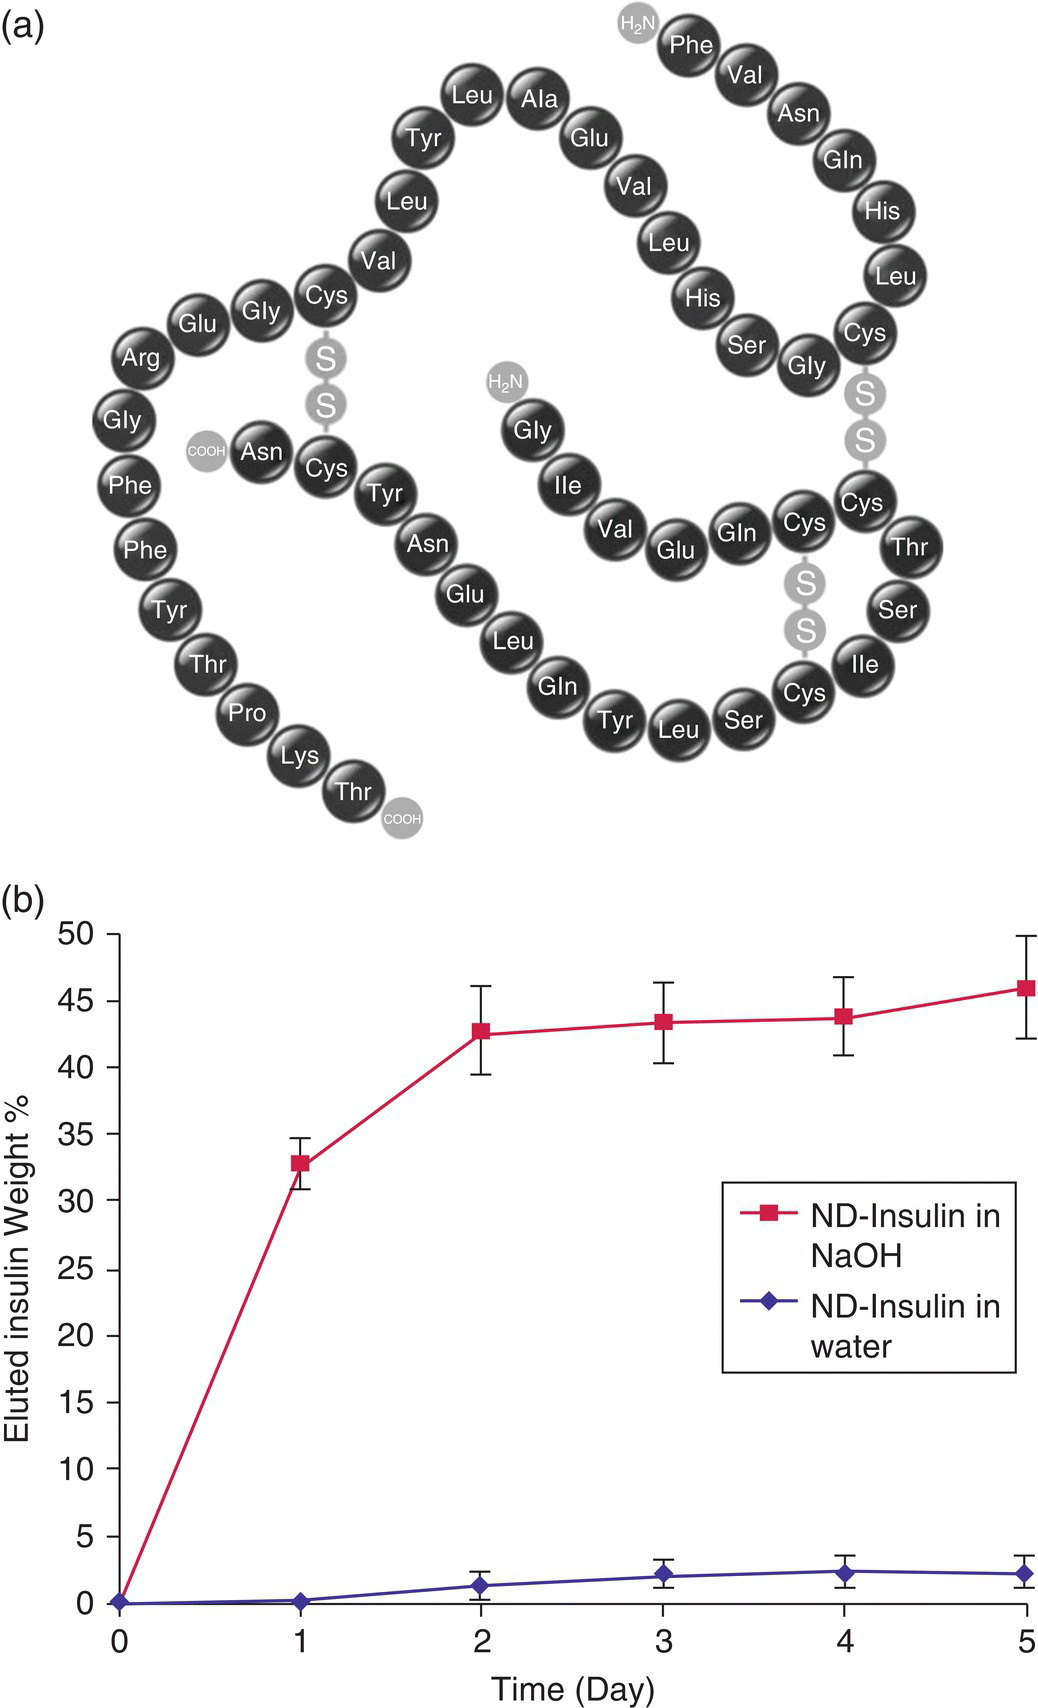 Top: Amino acid sequence of human insulin. Bottom: Line graph of eluted insulin vs. day displaying two curves with markers and error bars representing ND-Insulin in NaOH (square) and ND-Insulin in water (diamond).